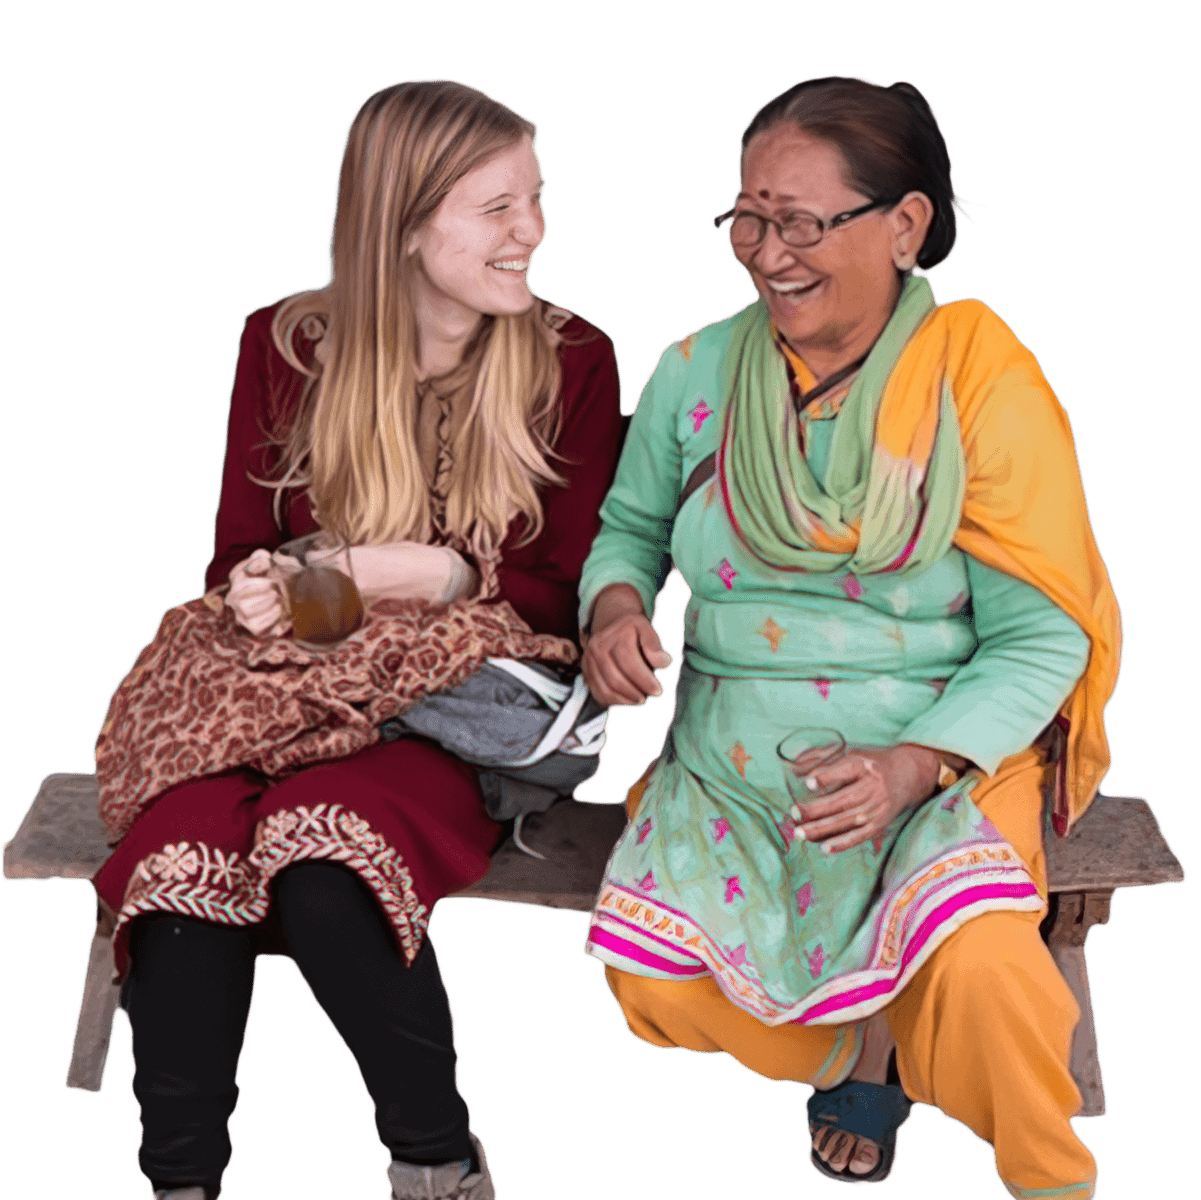 Missionary and her local friend dressed up in traditional clothe, having a cup of tea